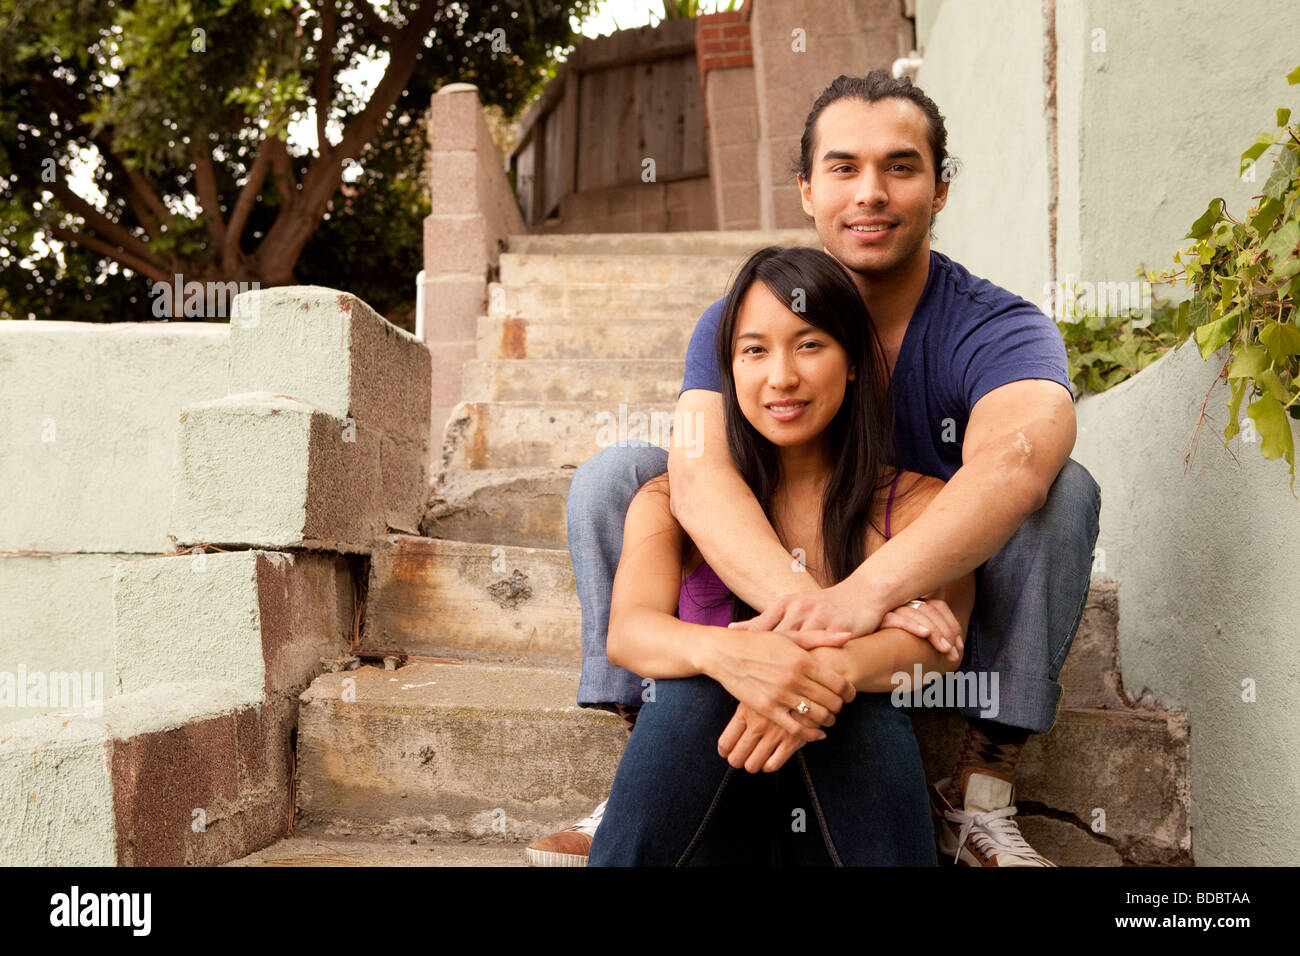 Male and female couple sitting on concrete steps, his arms are around her.  Looking at camera.  Woman is Filipino. Stock Photo